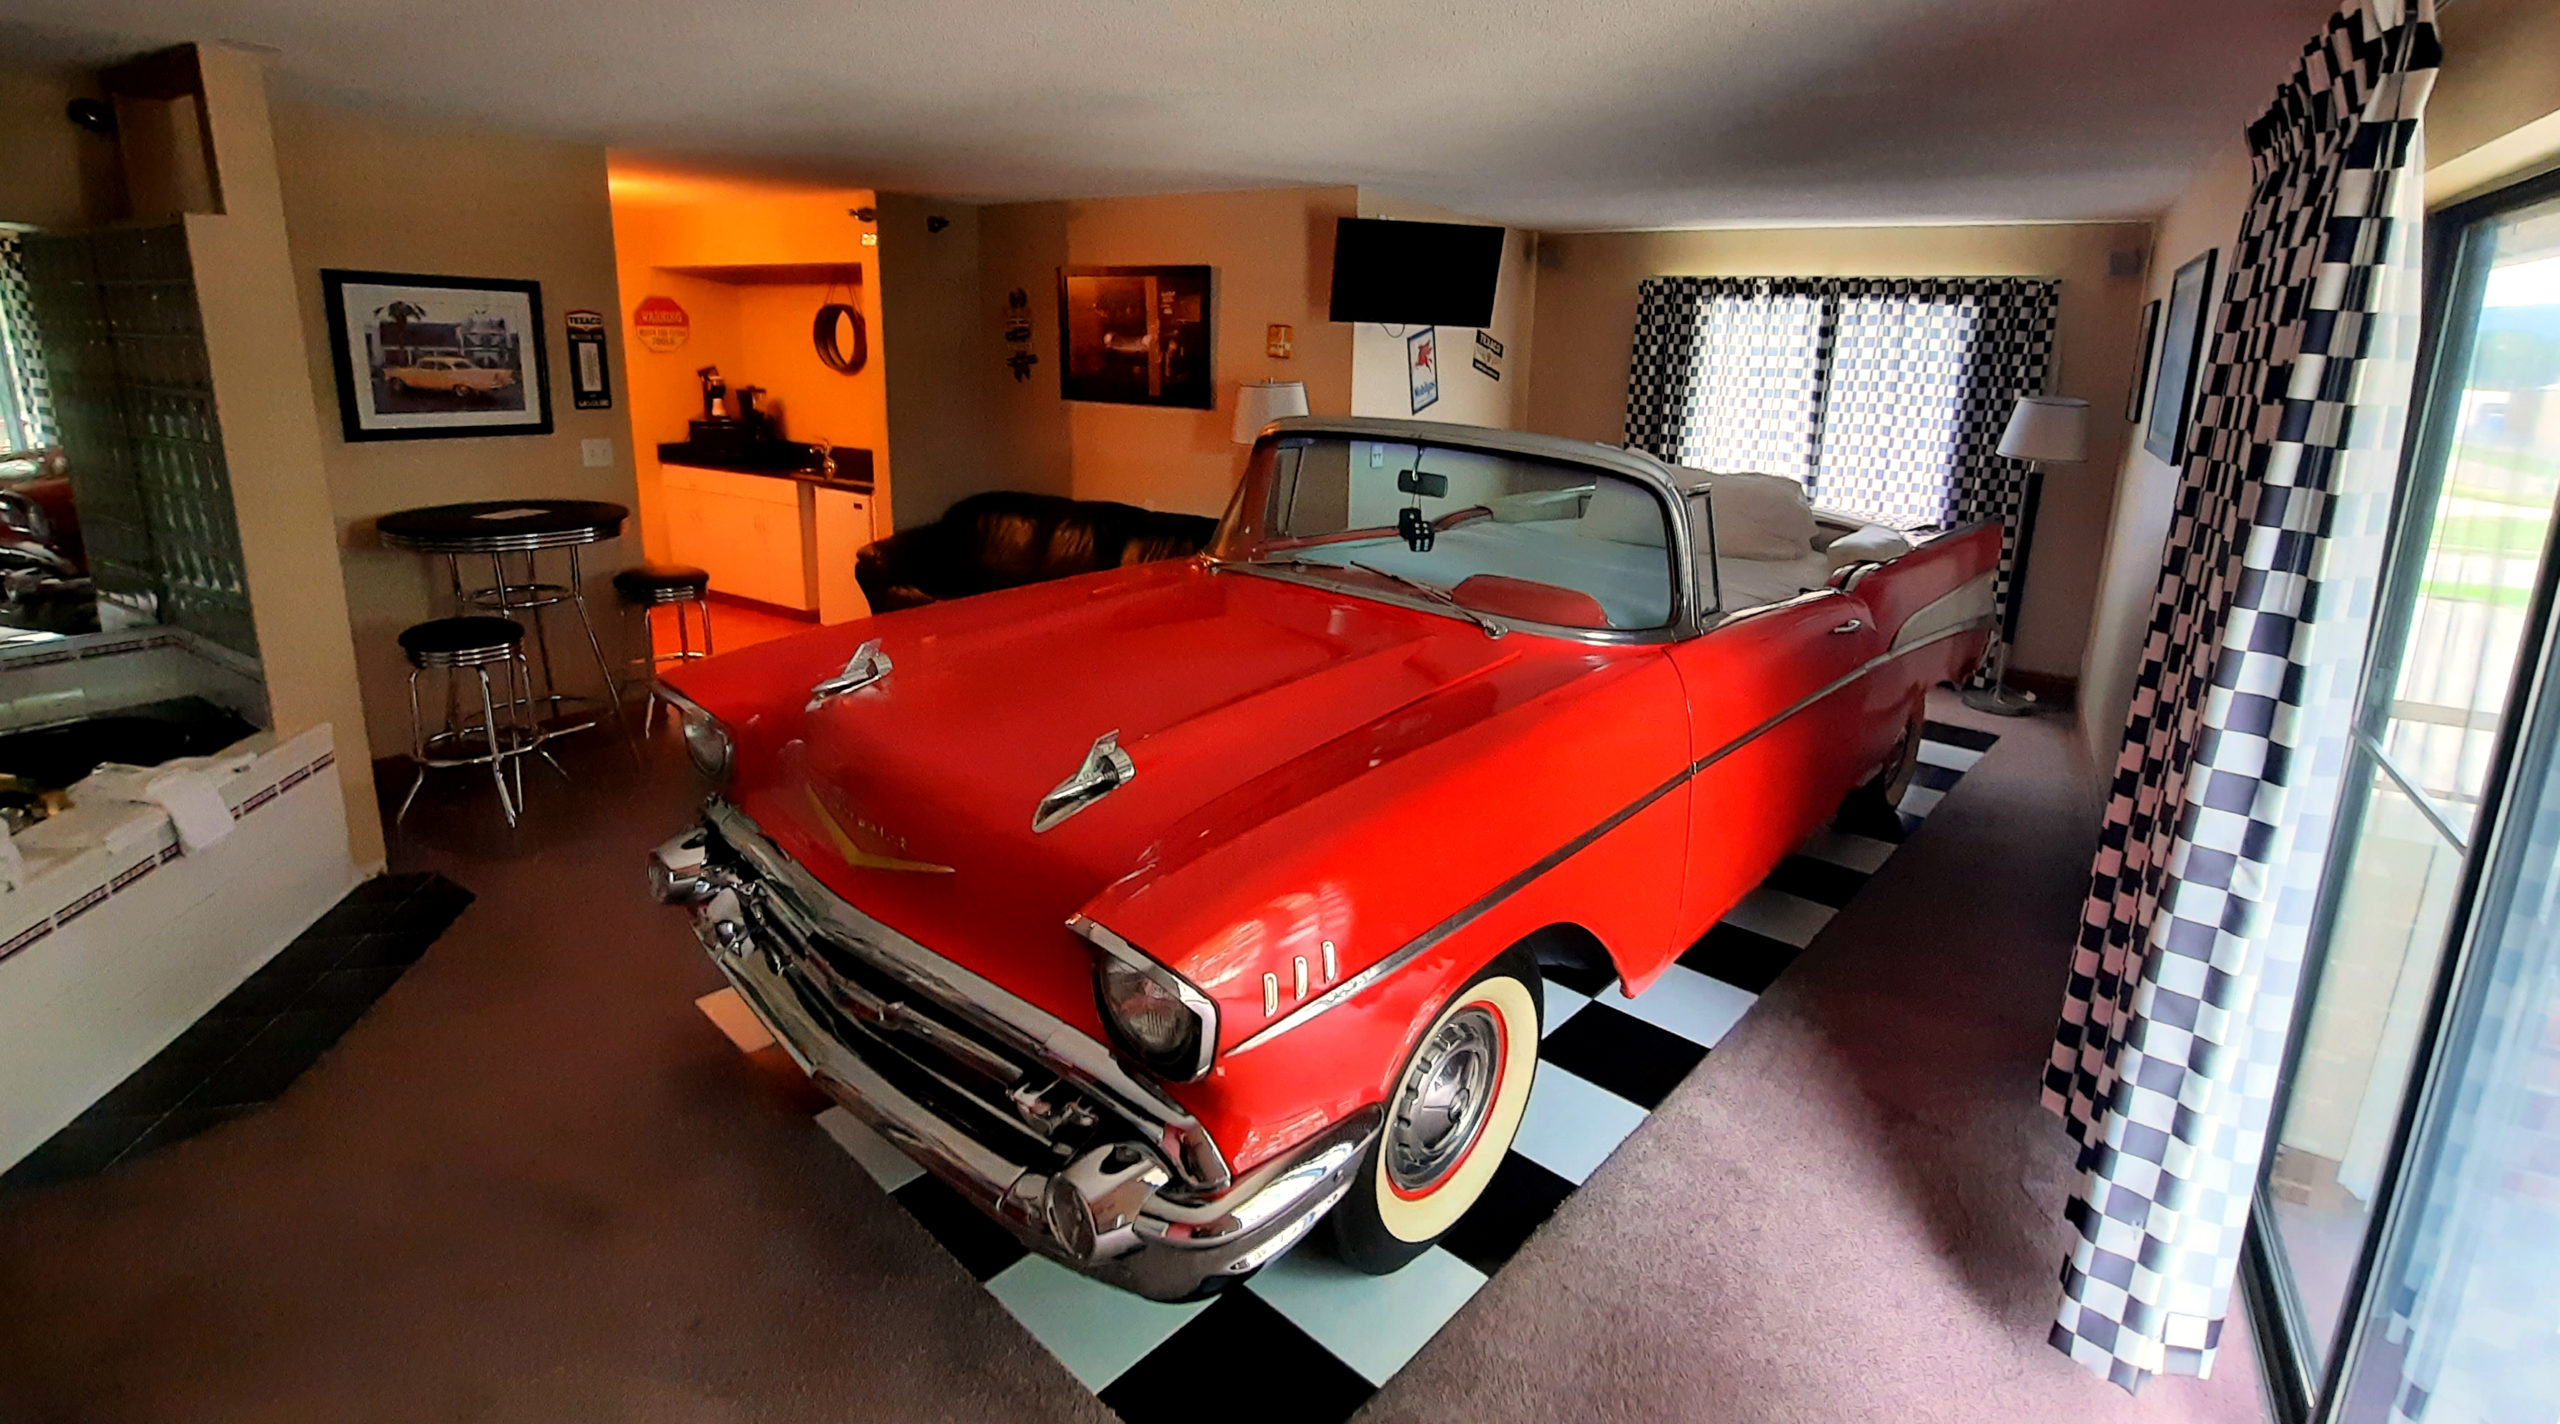 a 1957 Chevy is converted into a bed at the Riverport Hotel in Winona